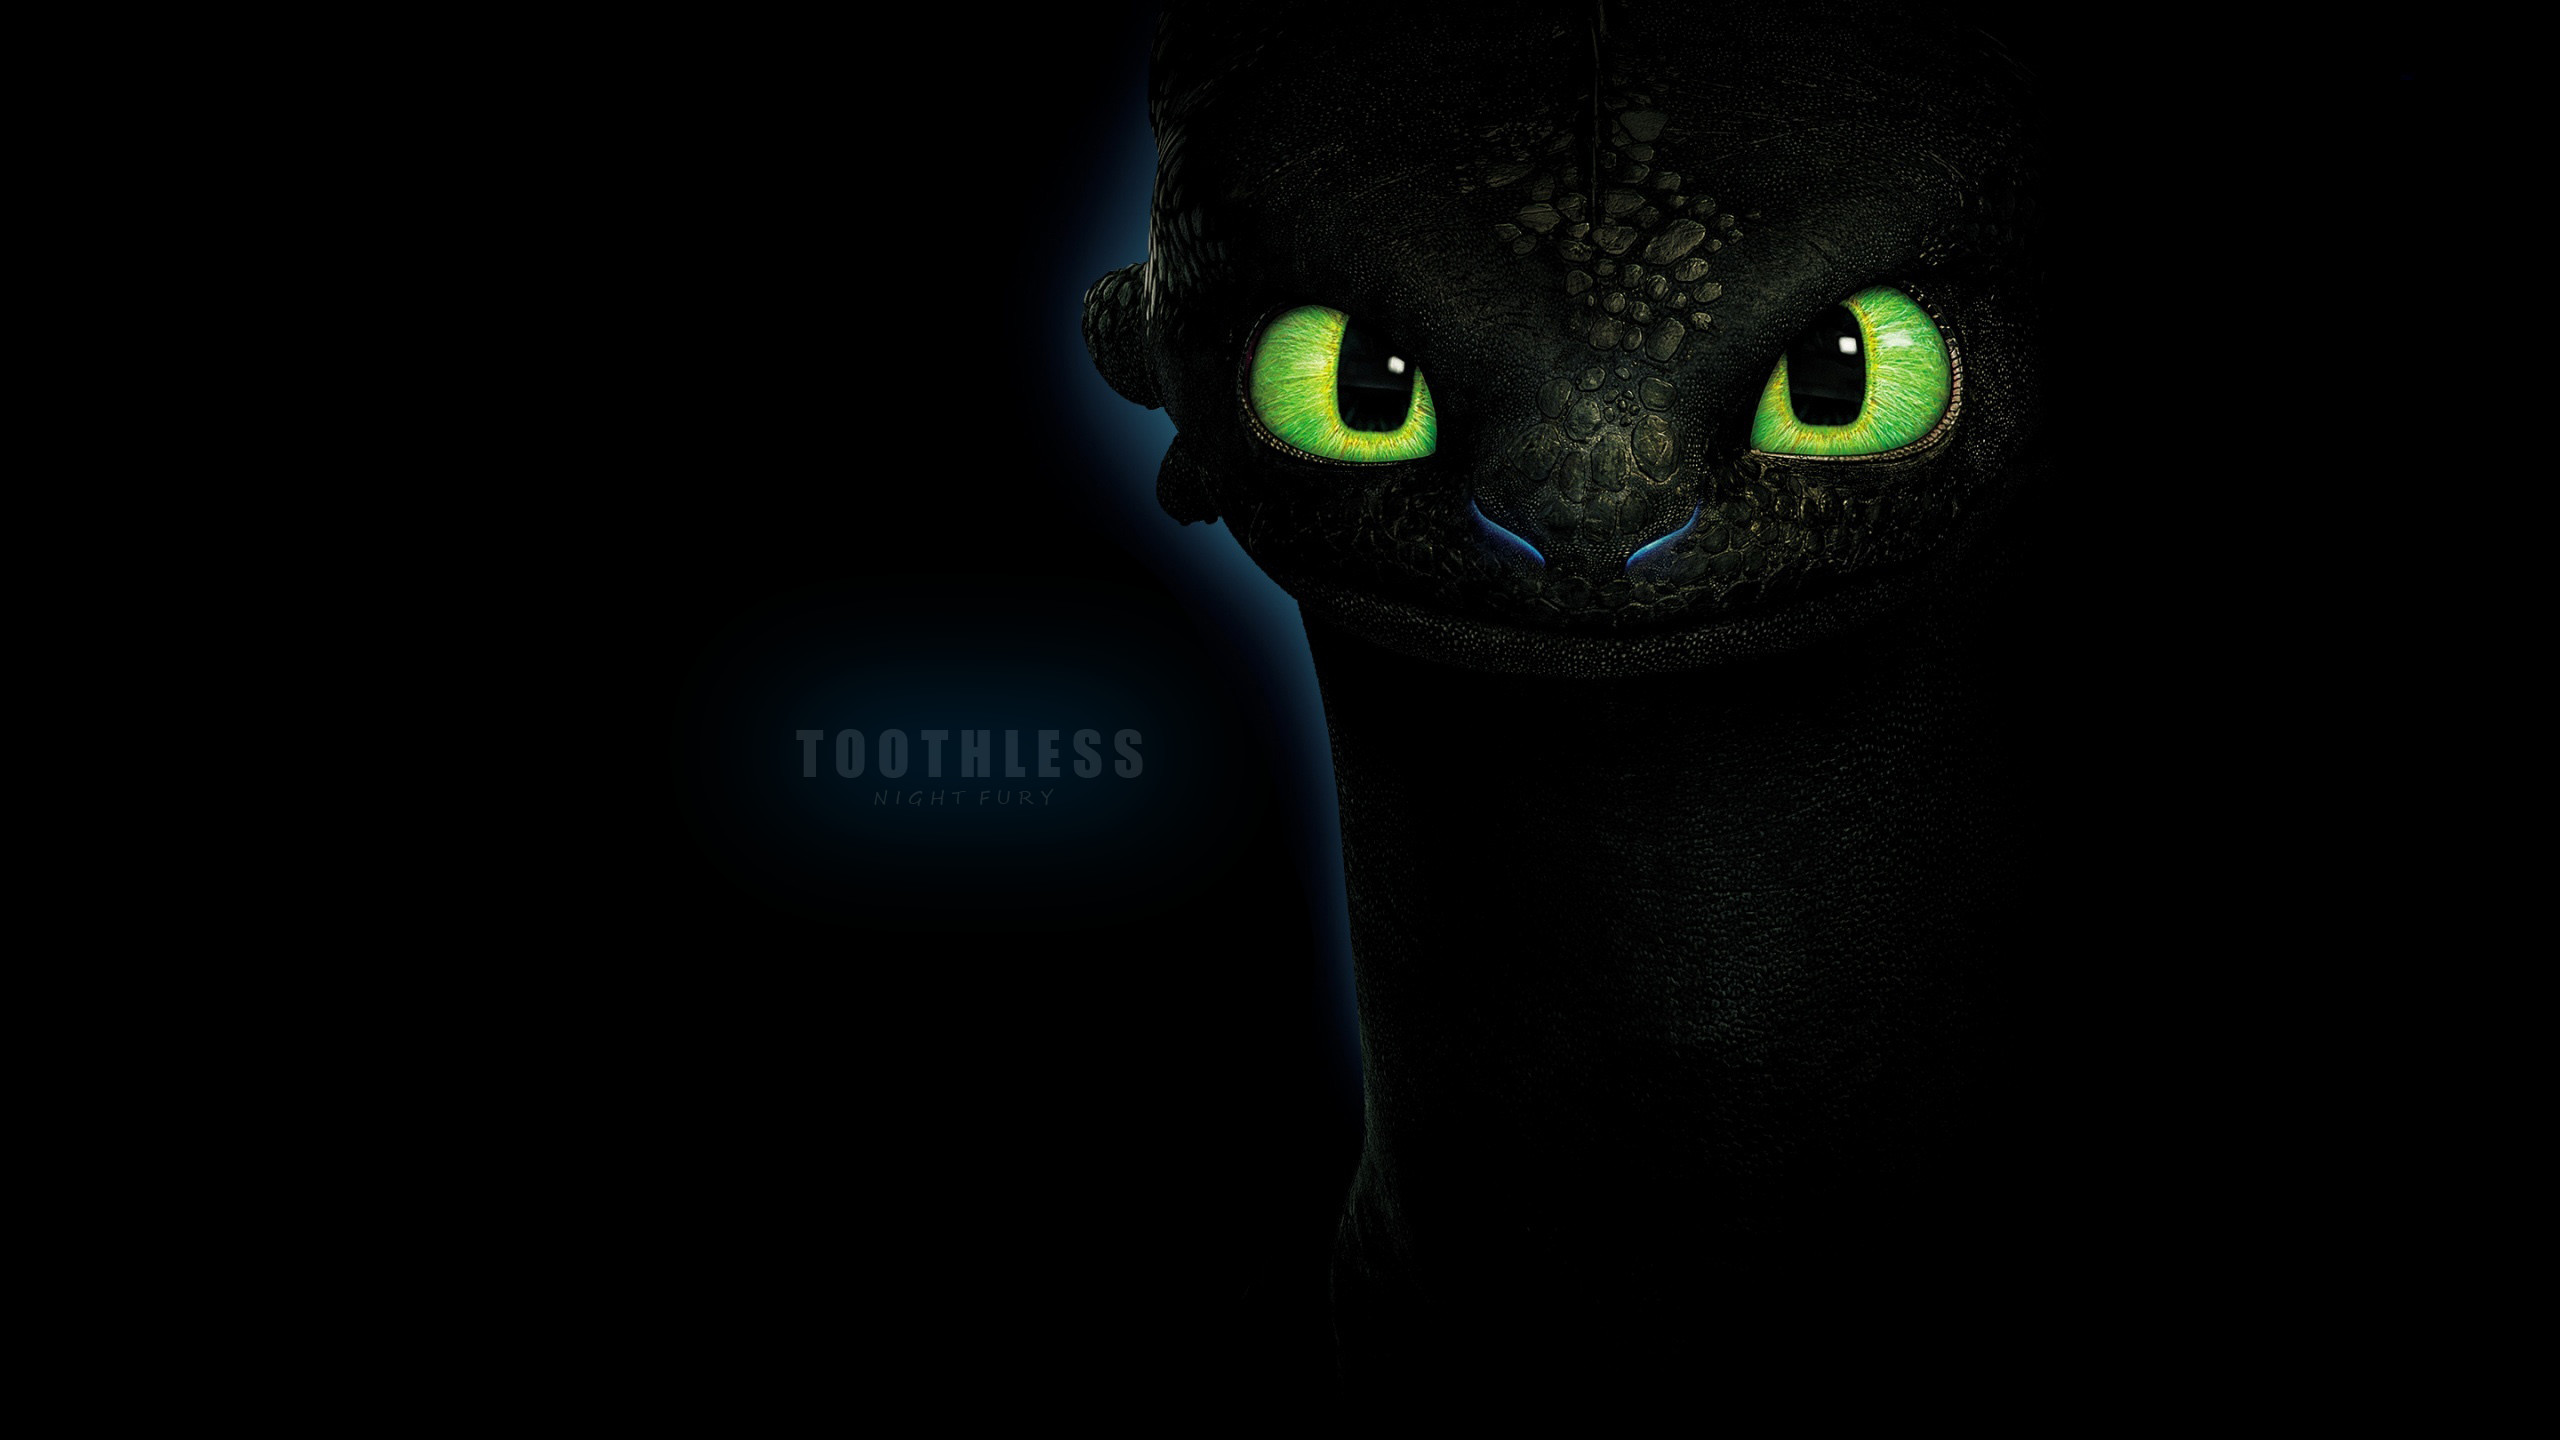 Toothless Wallpaper By Aspire443 Toothless Wallpaper By Aspire443 2560x1440